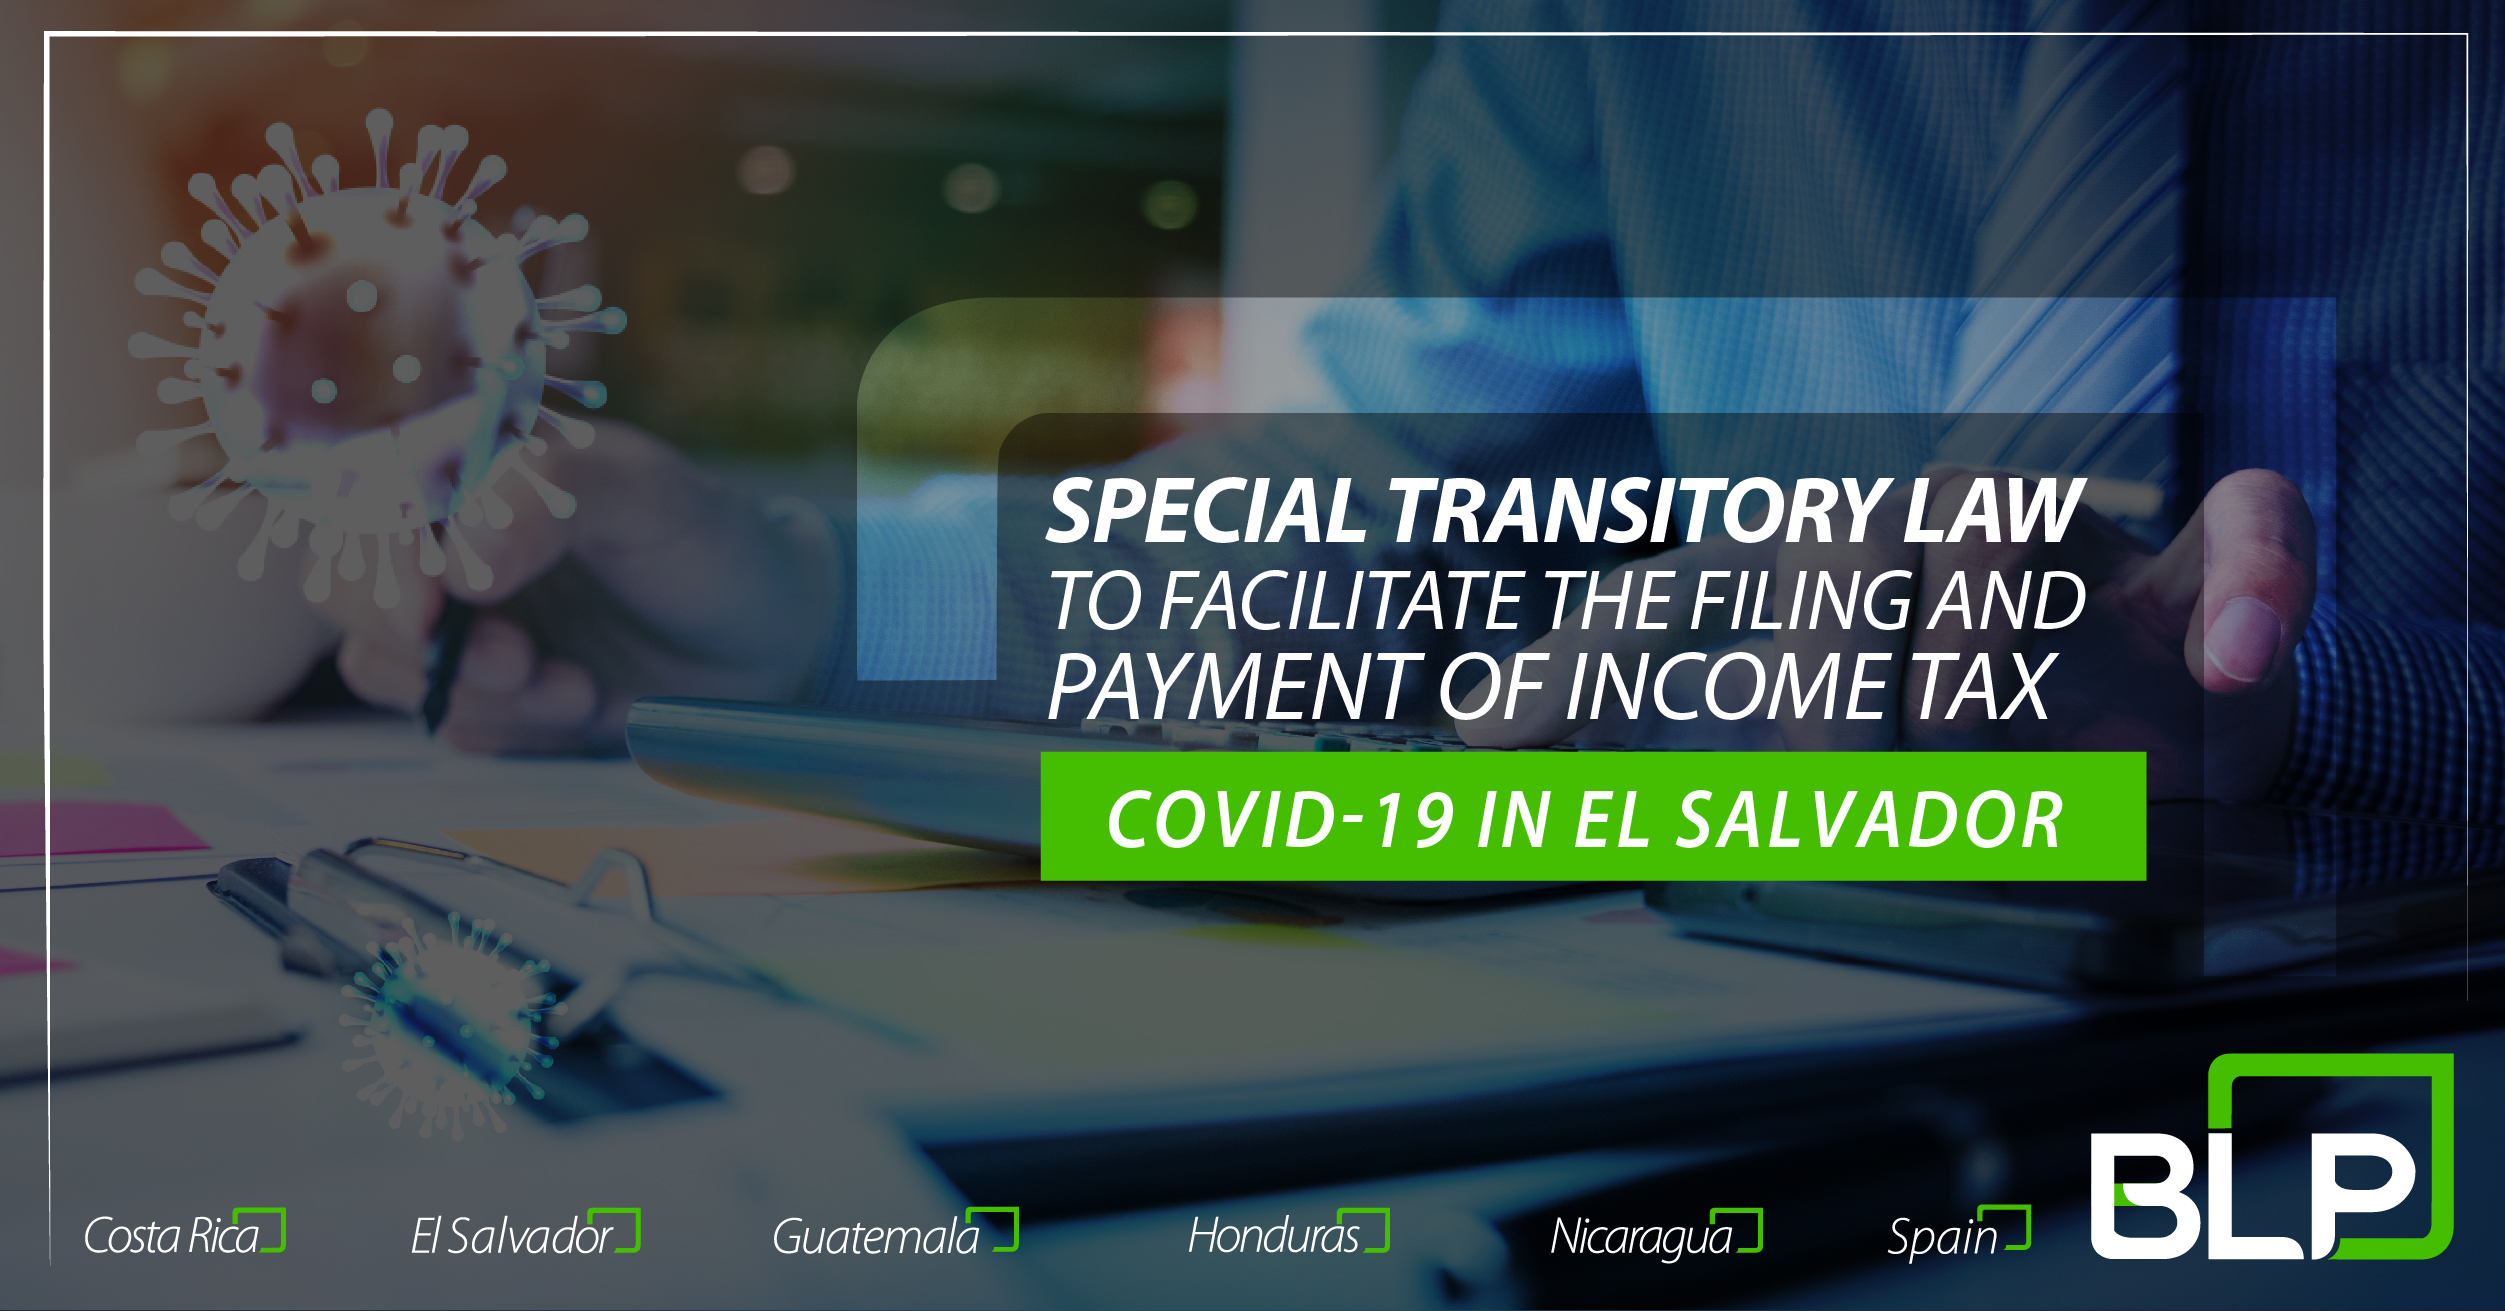 Special Transitory Law to facilitate the filing and payment of income tax.